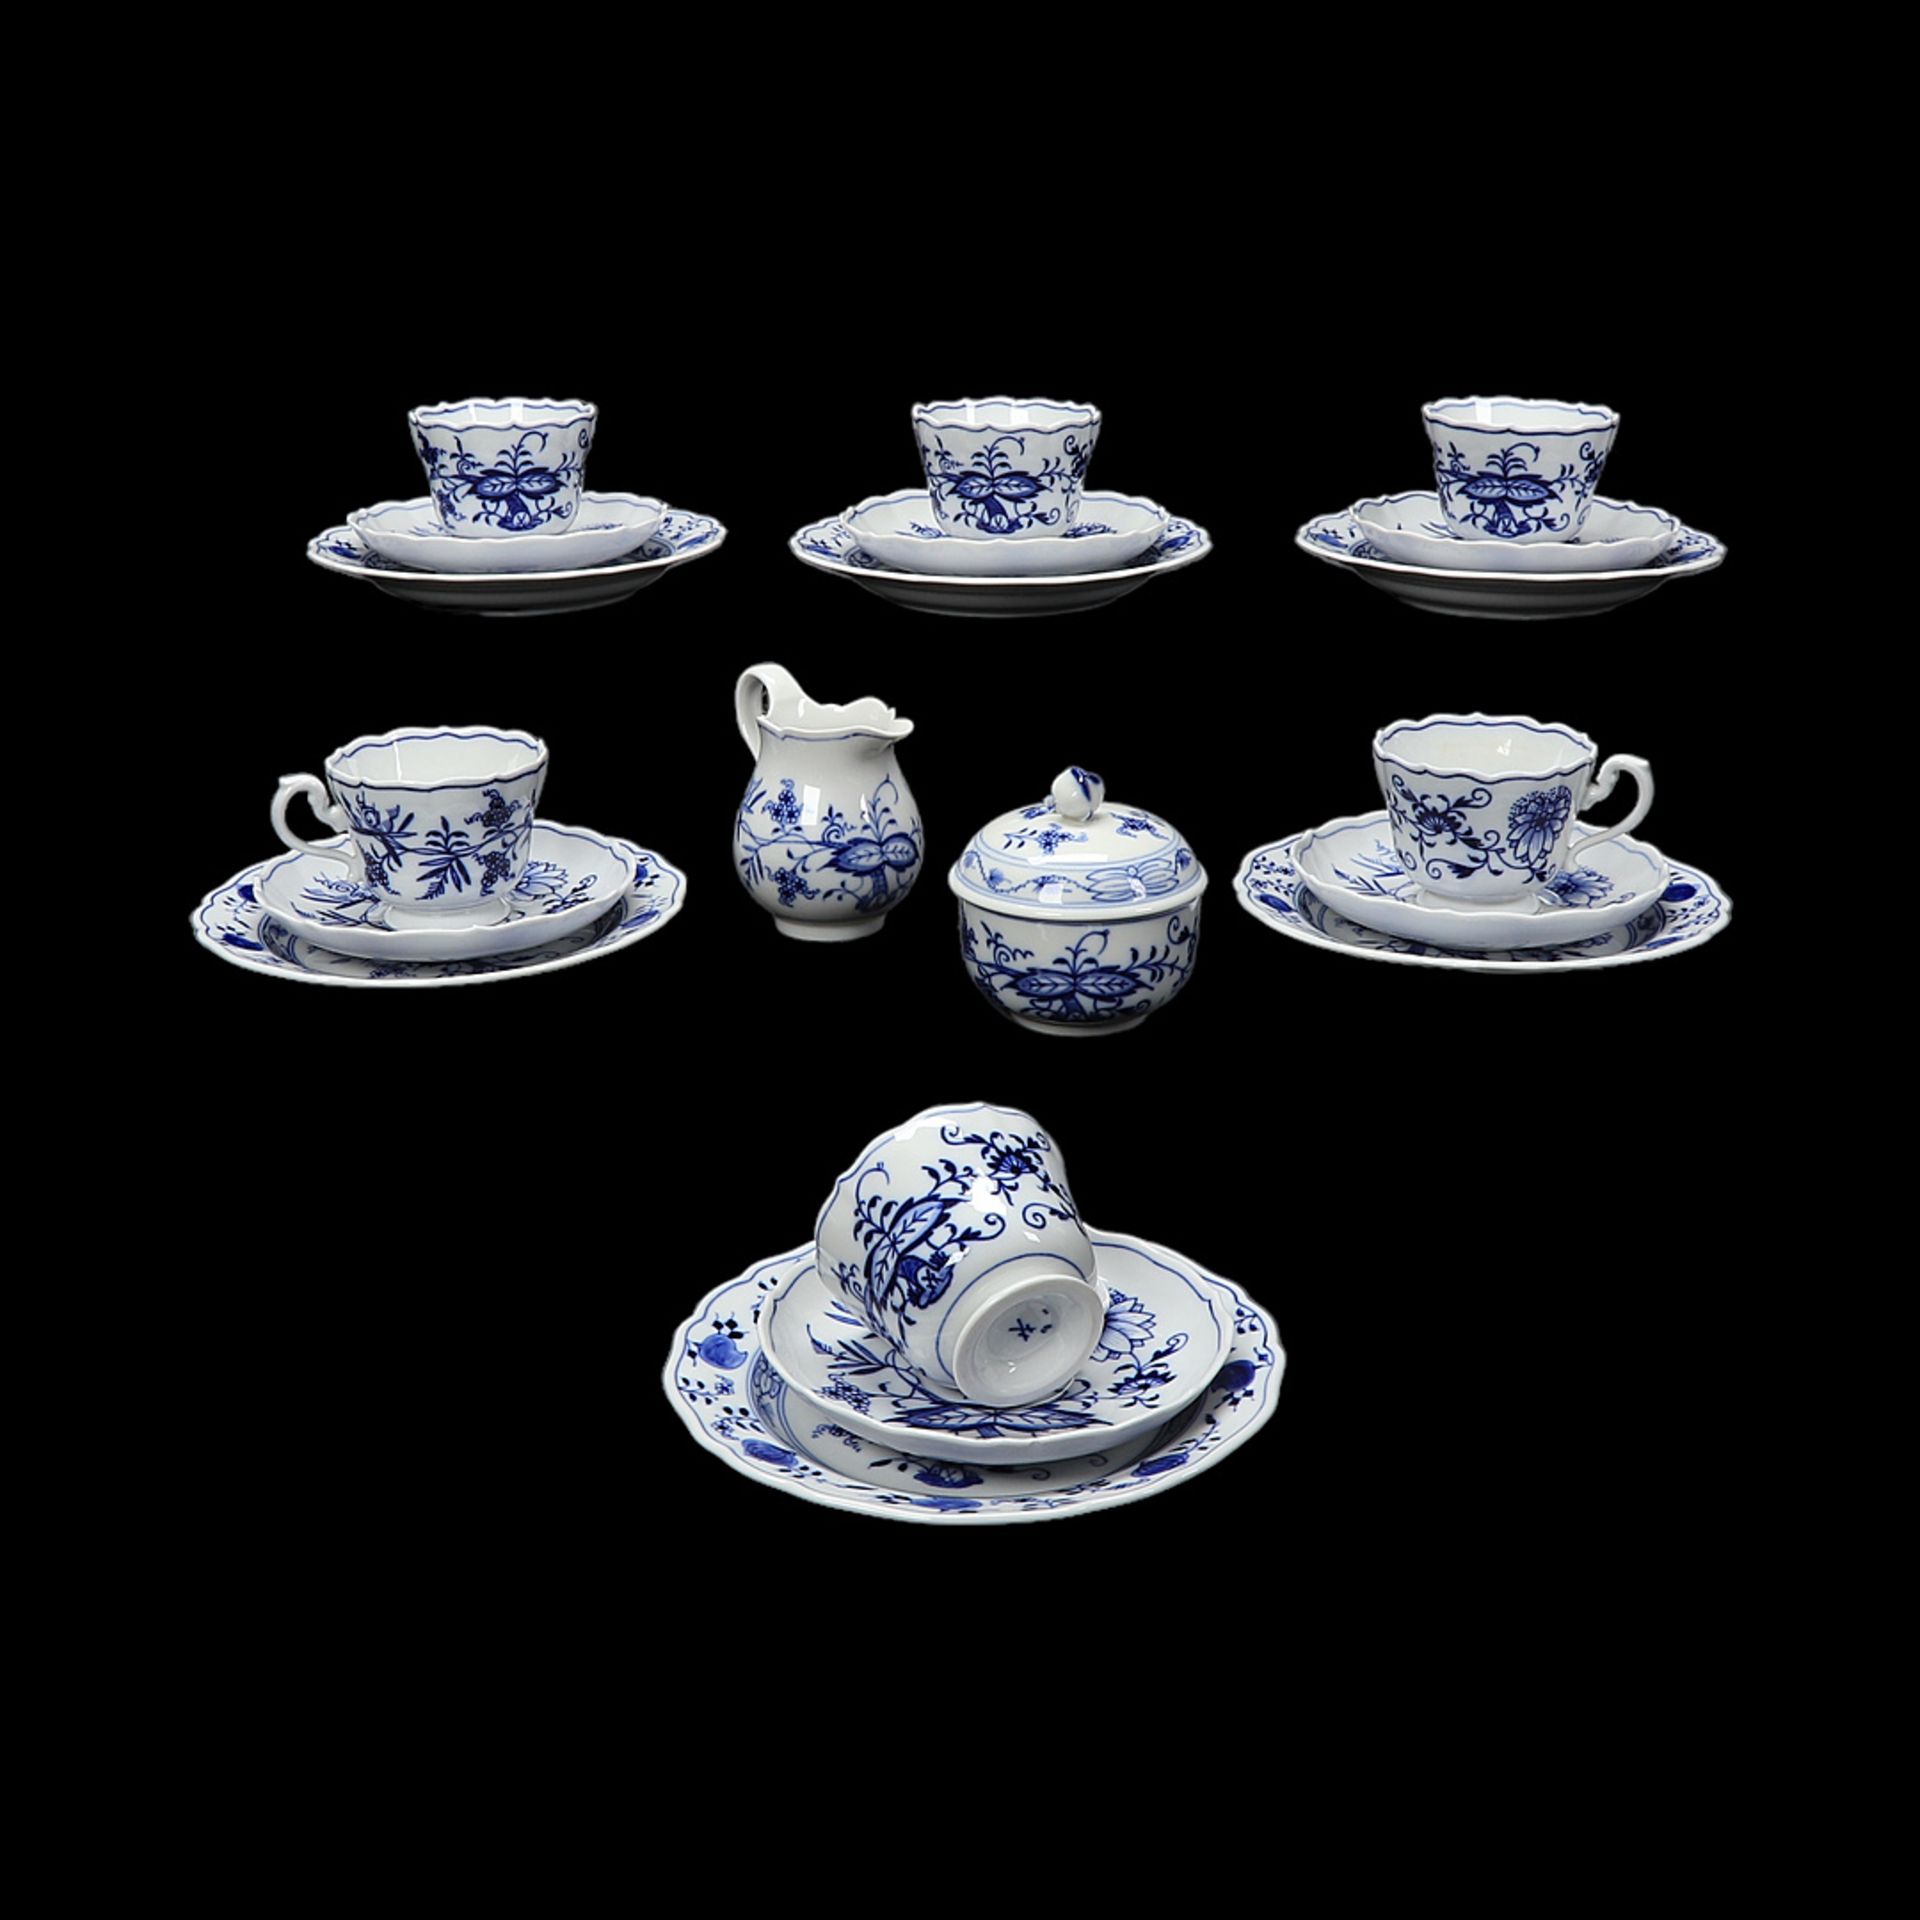 Six Meissen place settings and part of a center piece with onion pattern, around 1980